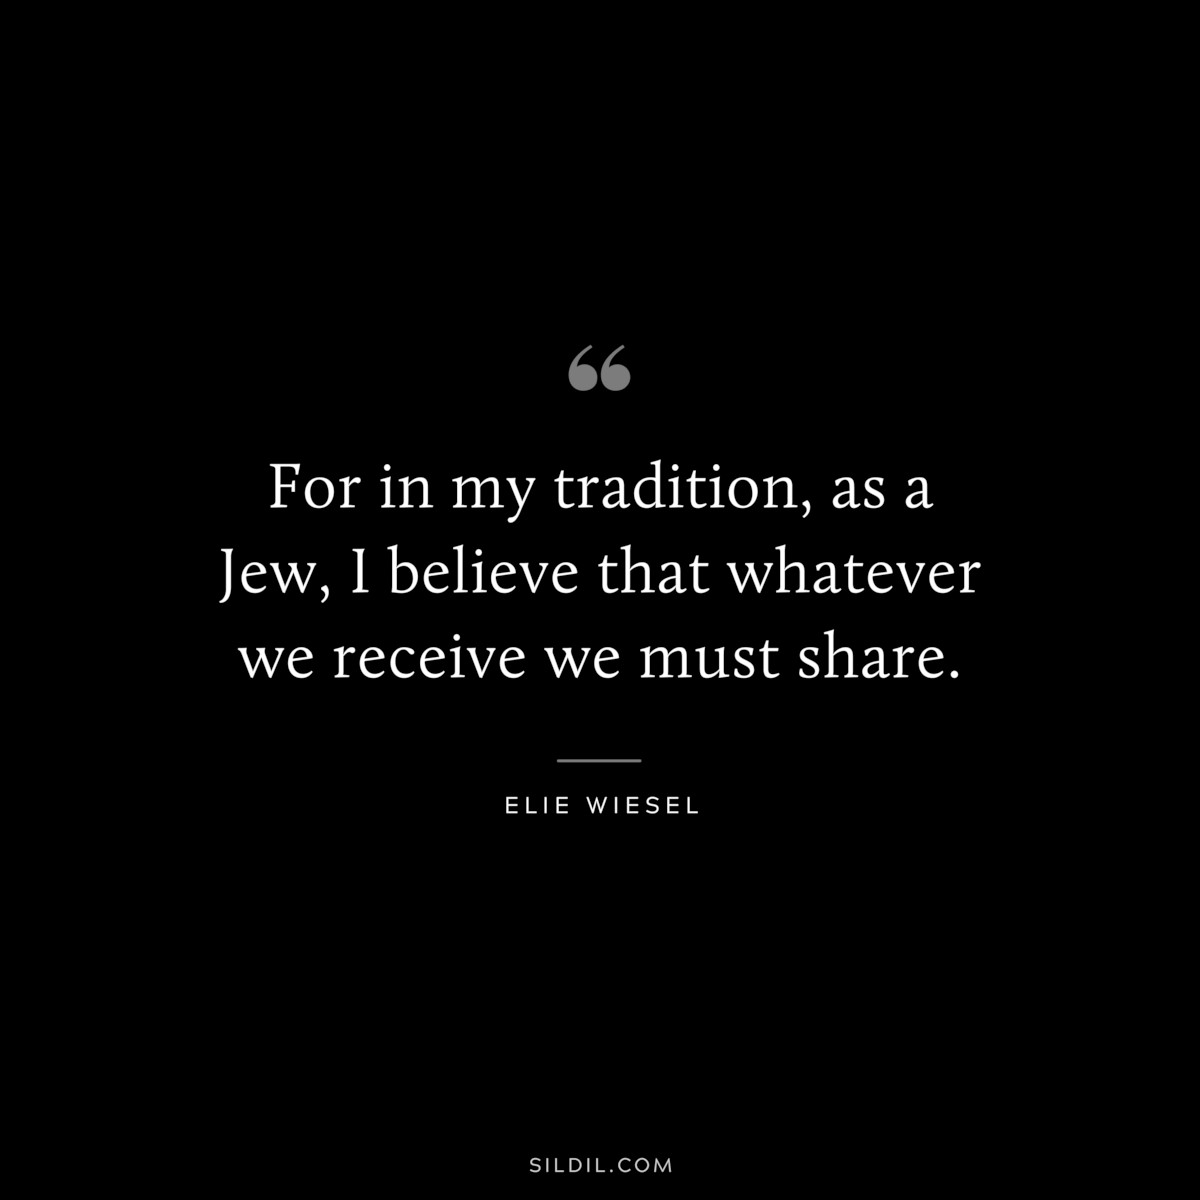 For in my tradition, as a Jew, I believe that whatever we receive we must share. ― Elie Wiesel